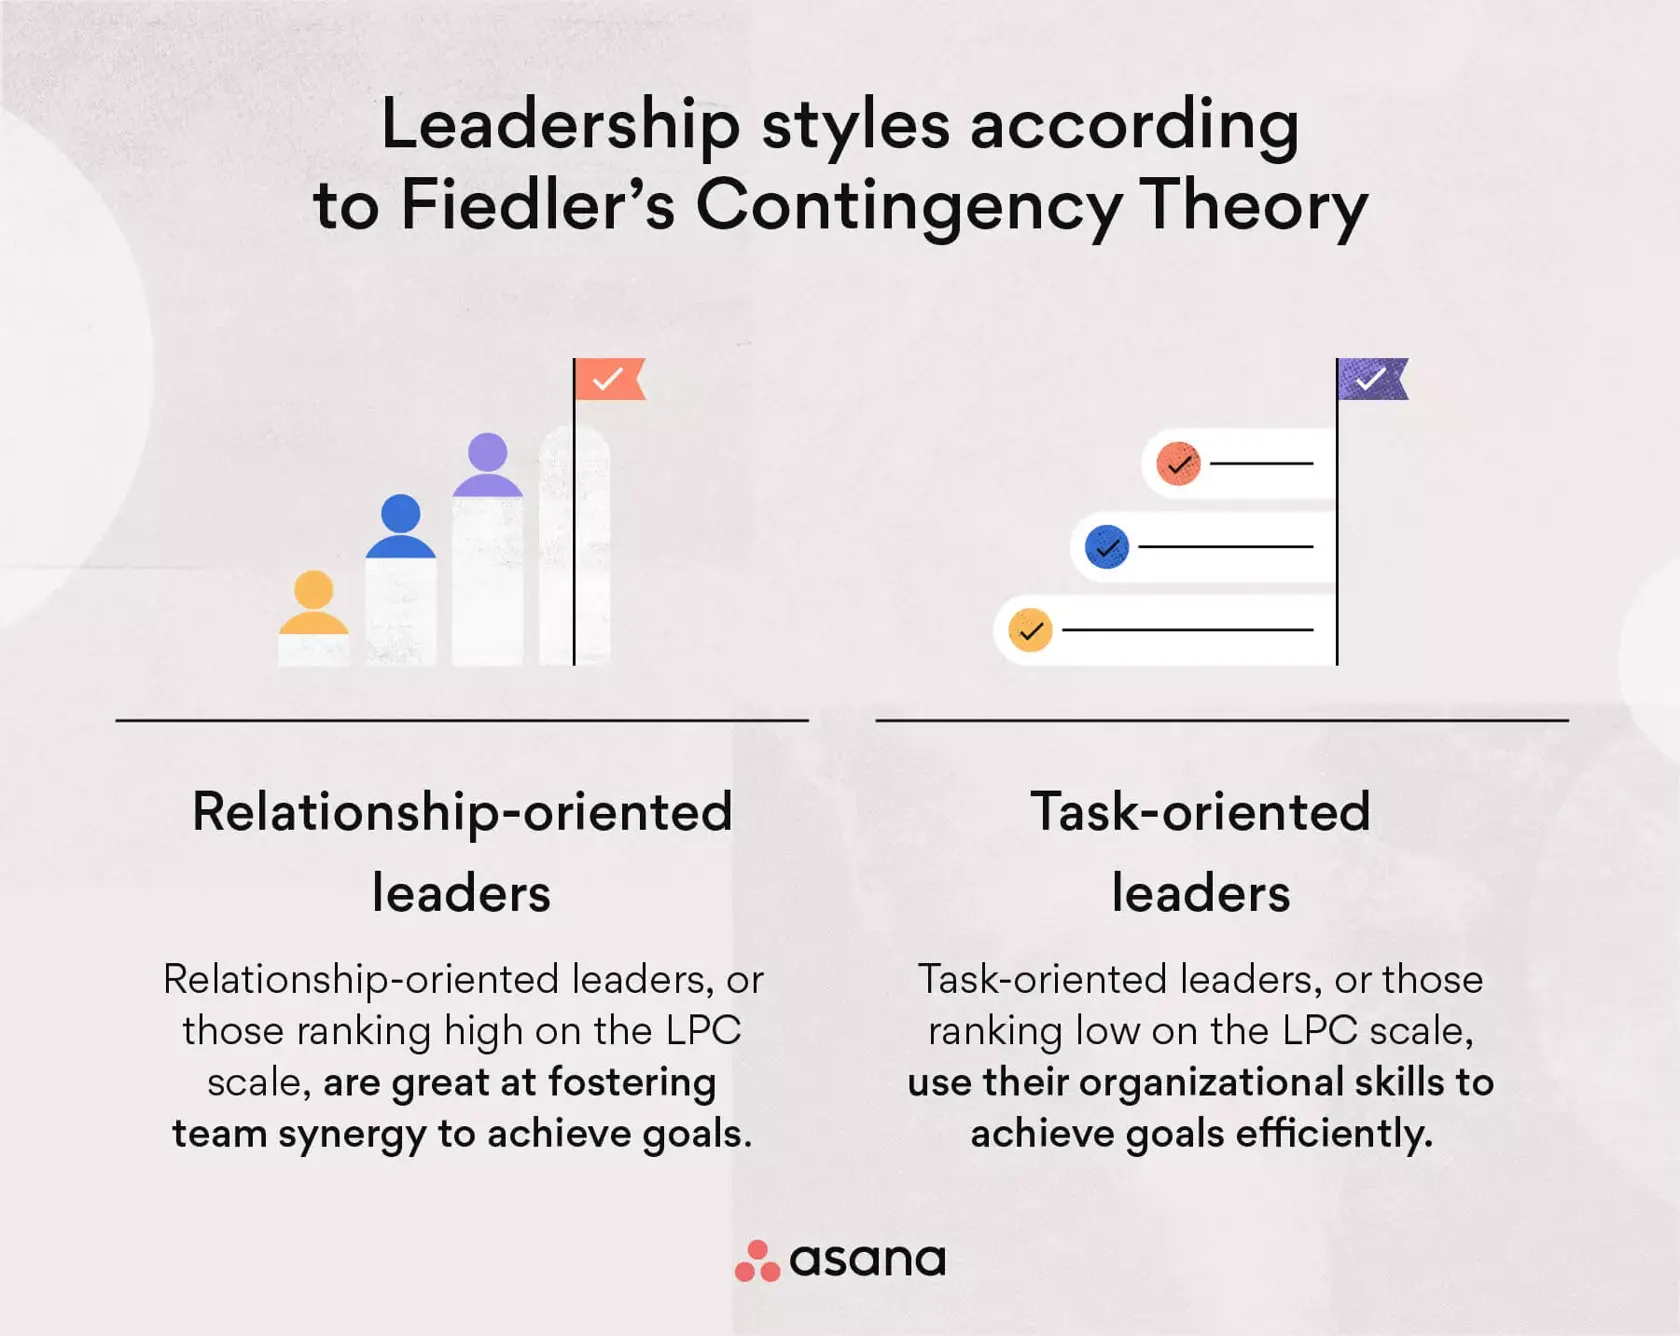 [inline illustration] Leadership styles according to Fiedler's Contingency Theory (infographic)